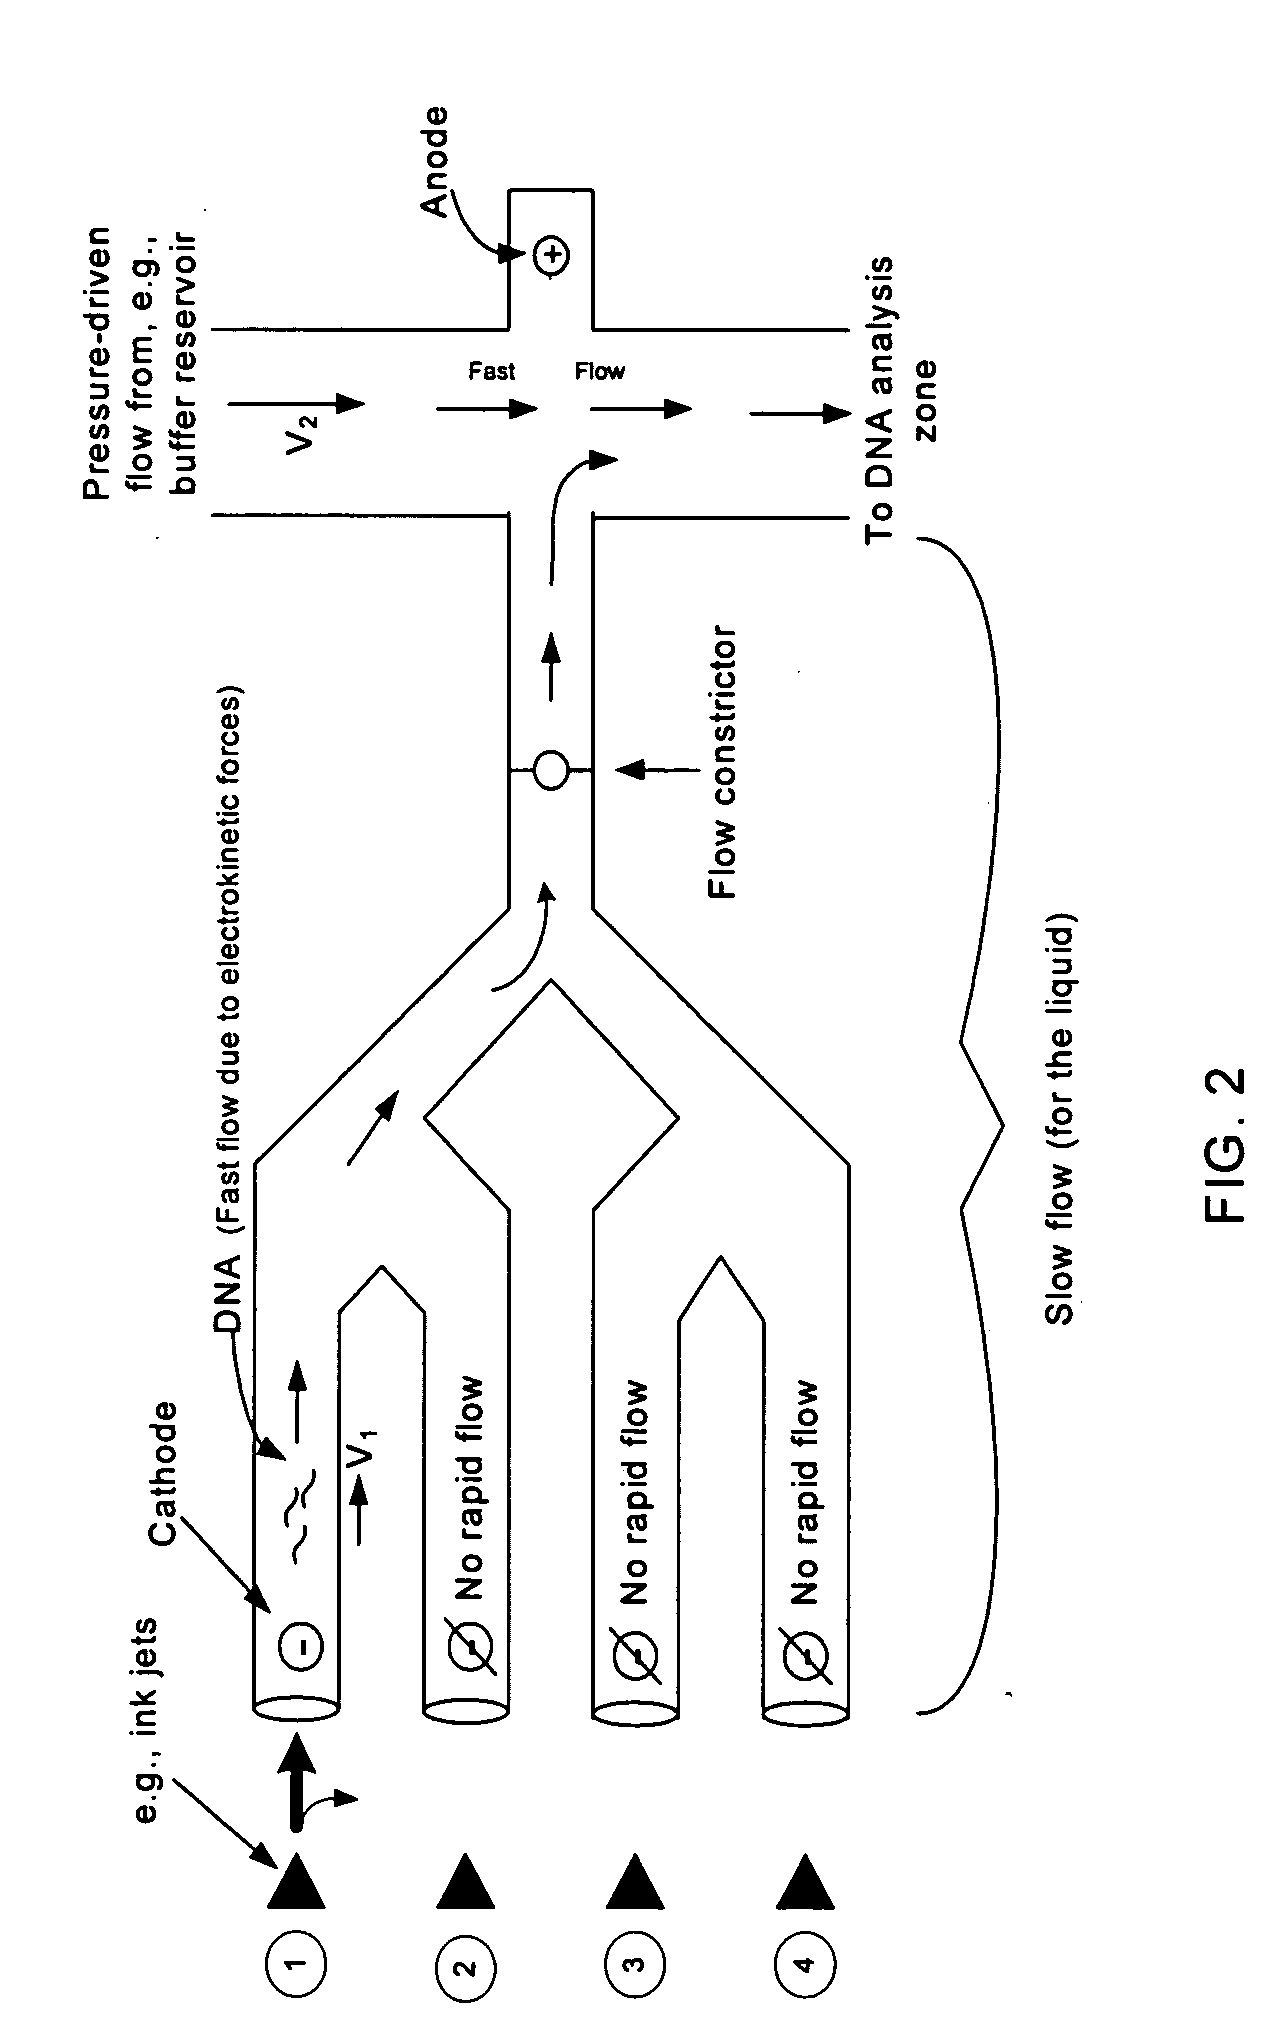 Method and molecular diagnostic device for detection, analysis and identification of genomic DNA